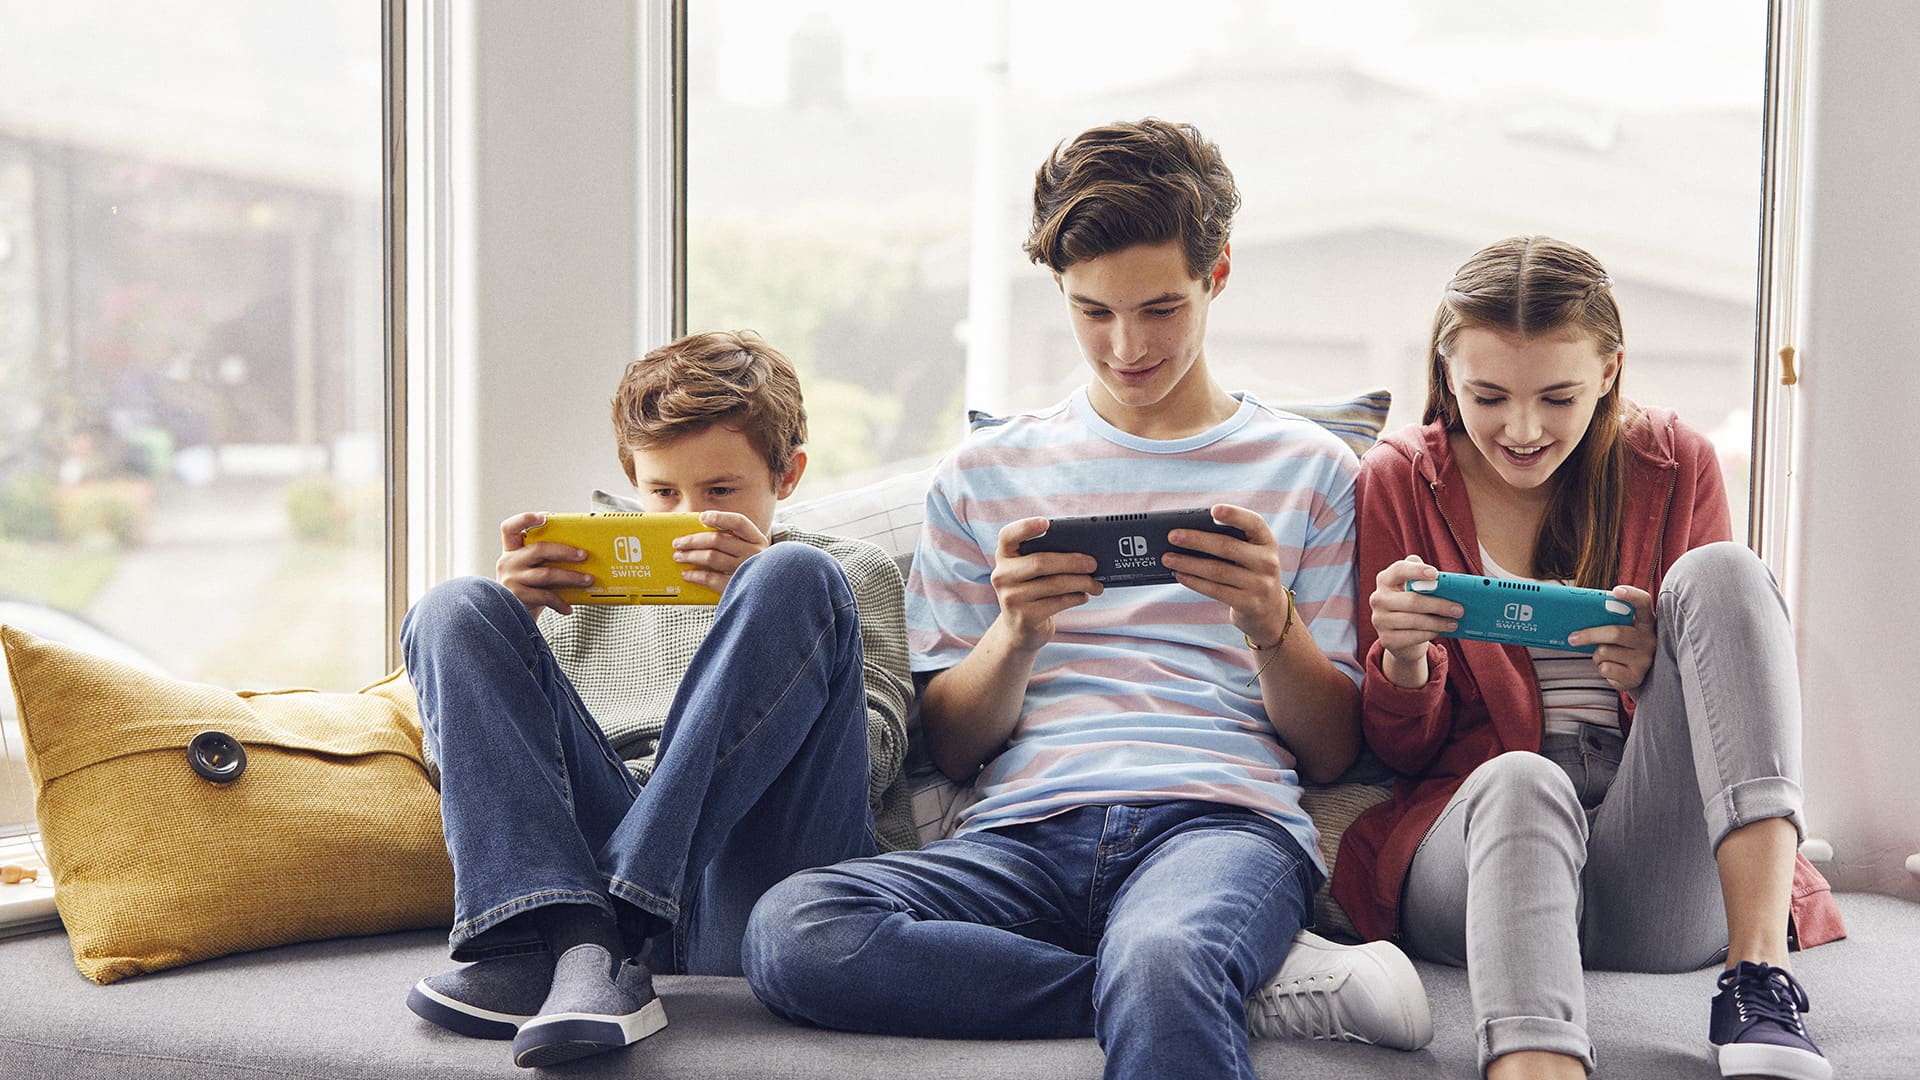 Make back to school fun with a Nintendo Switch